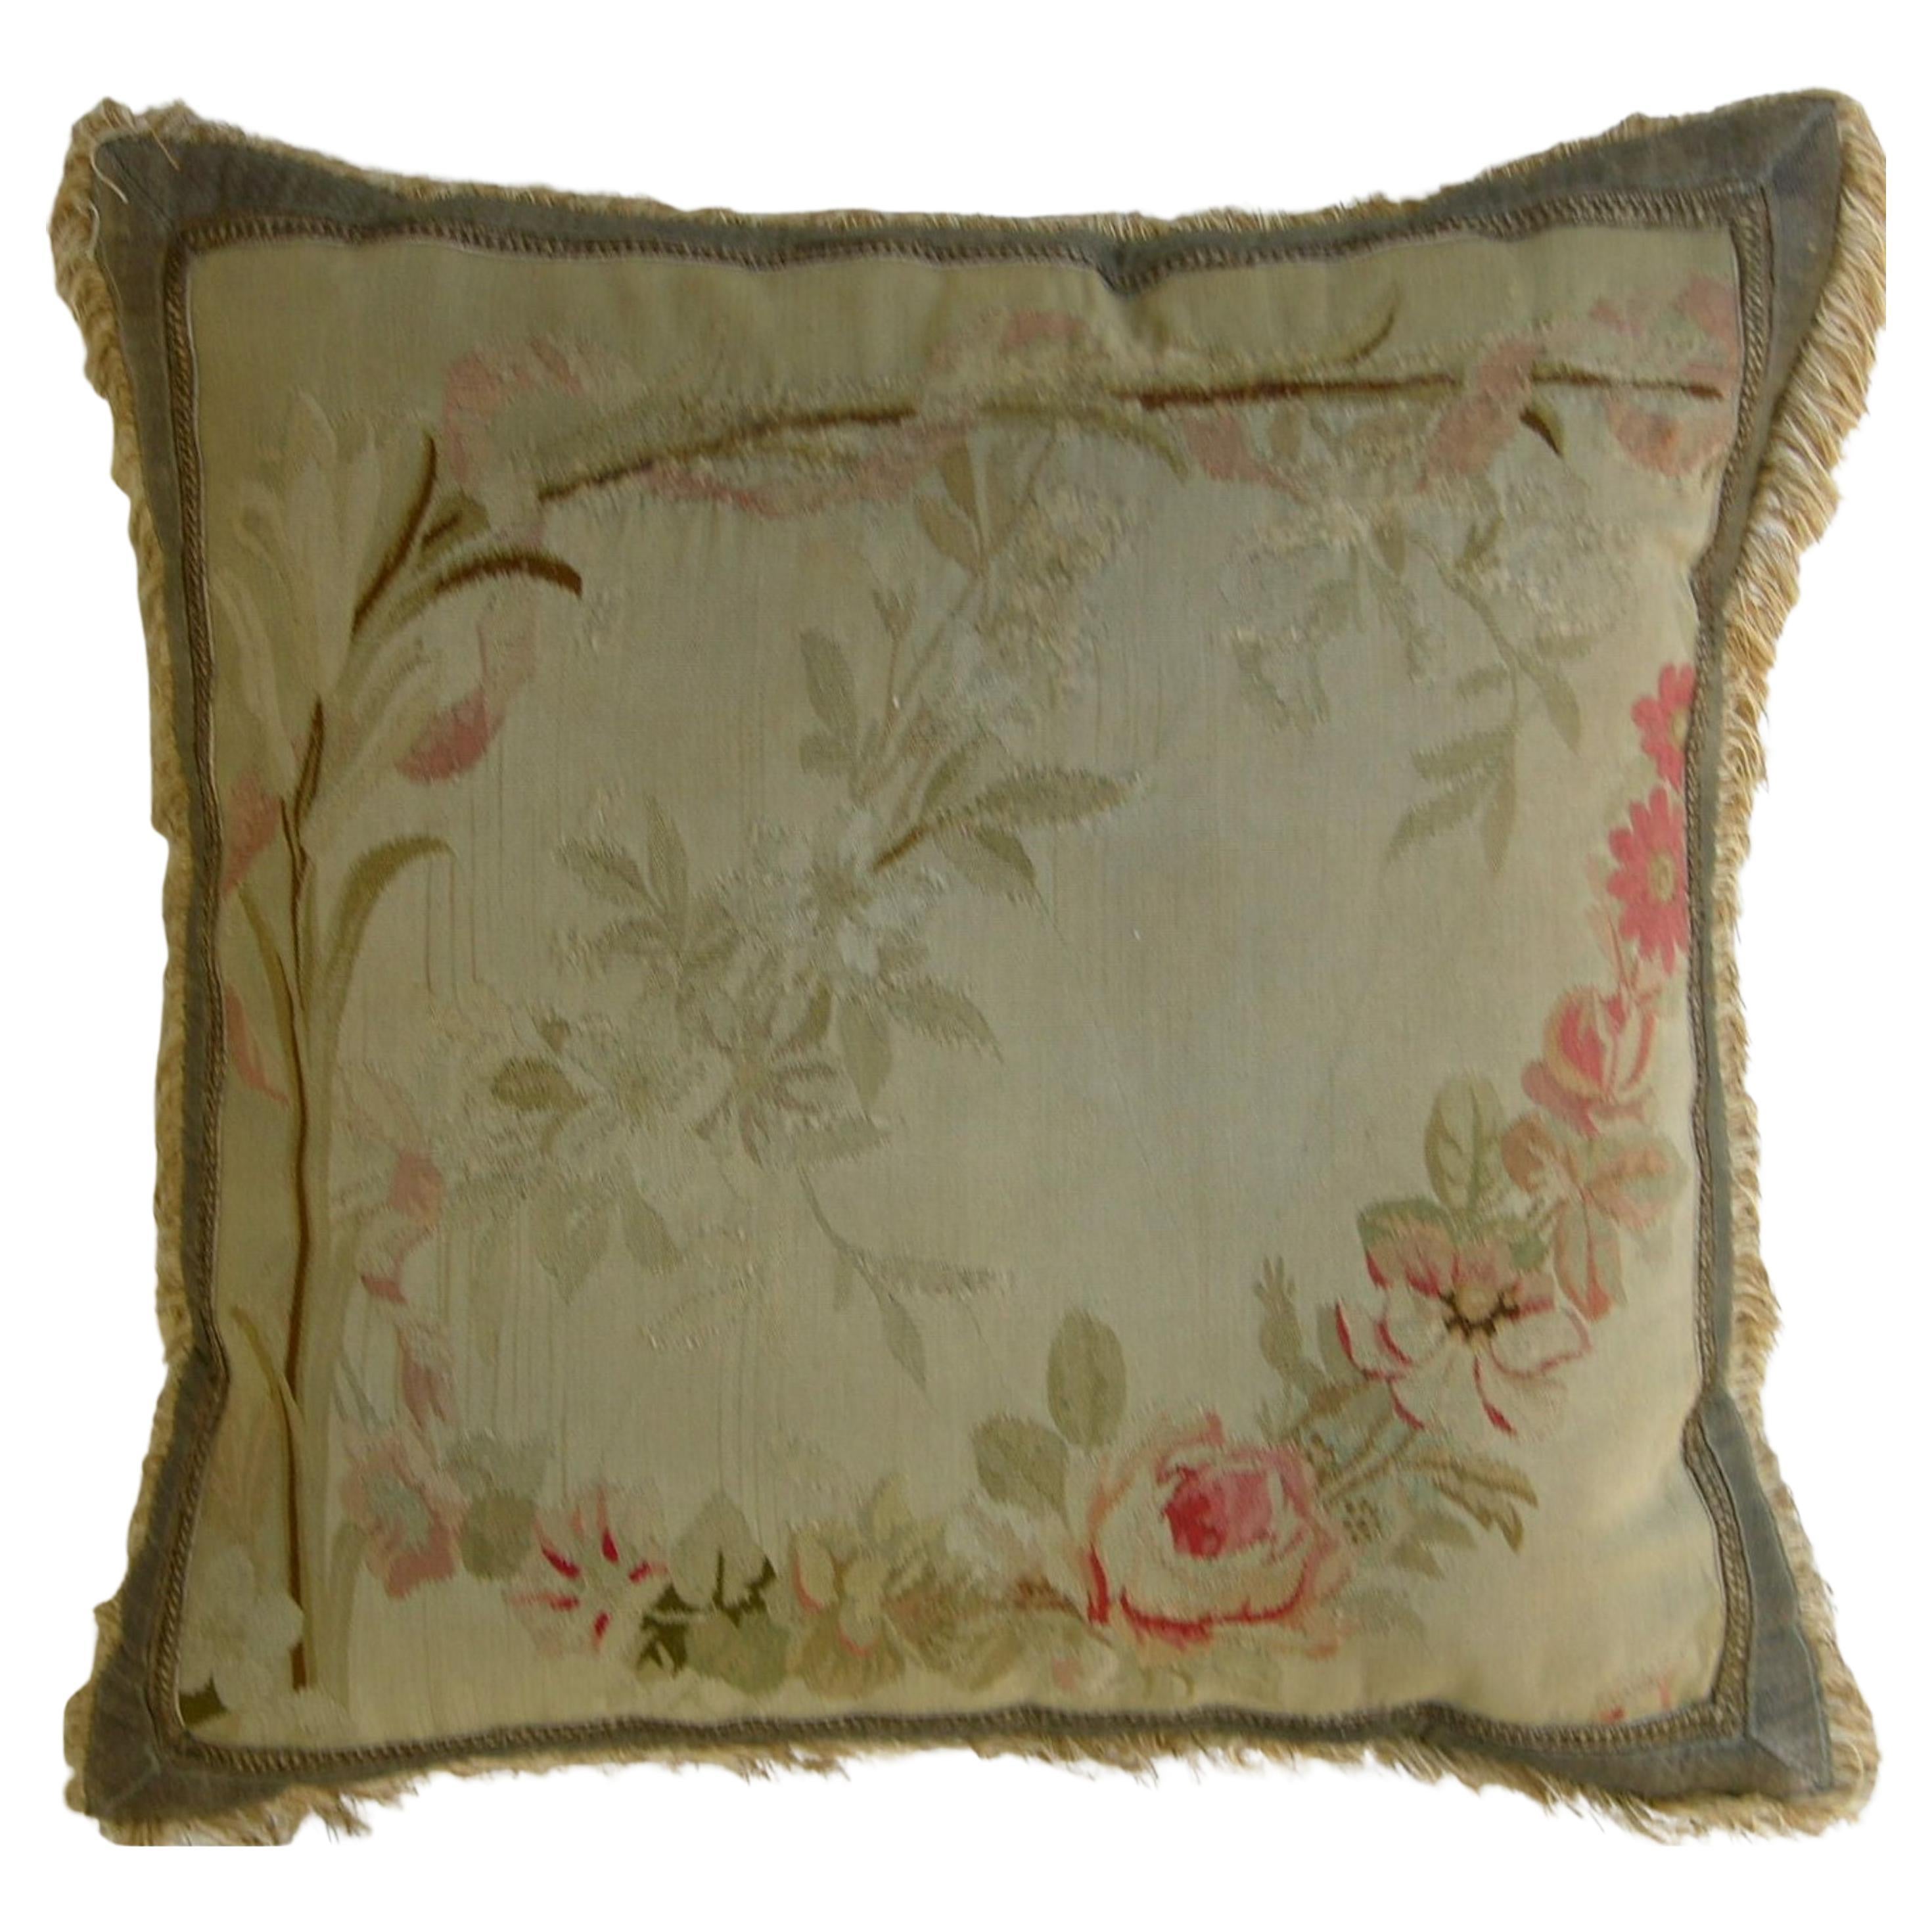 Circa 1860 Antique French Aubusson Tapestry Pillow